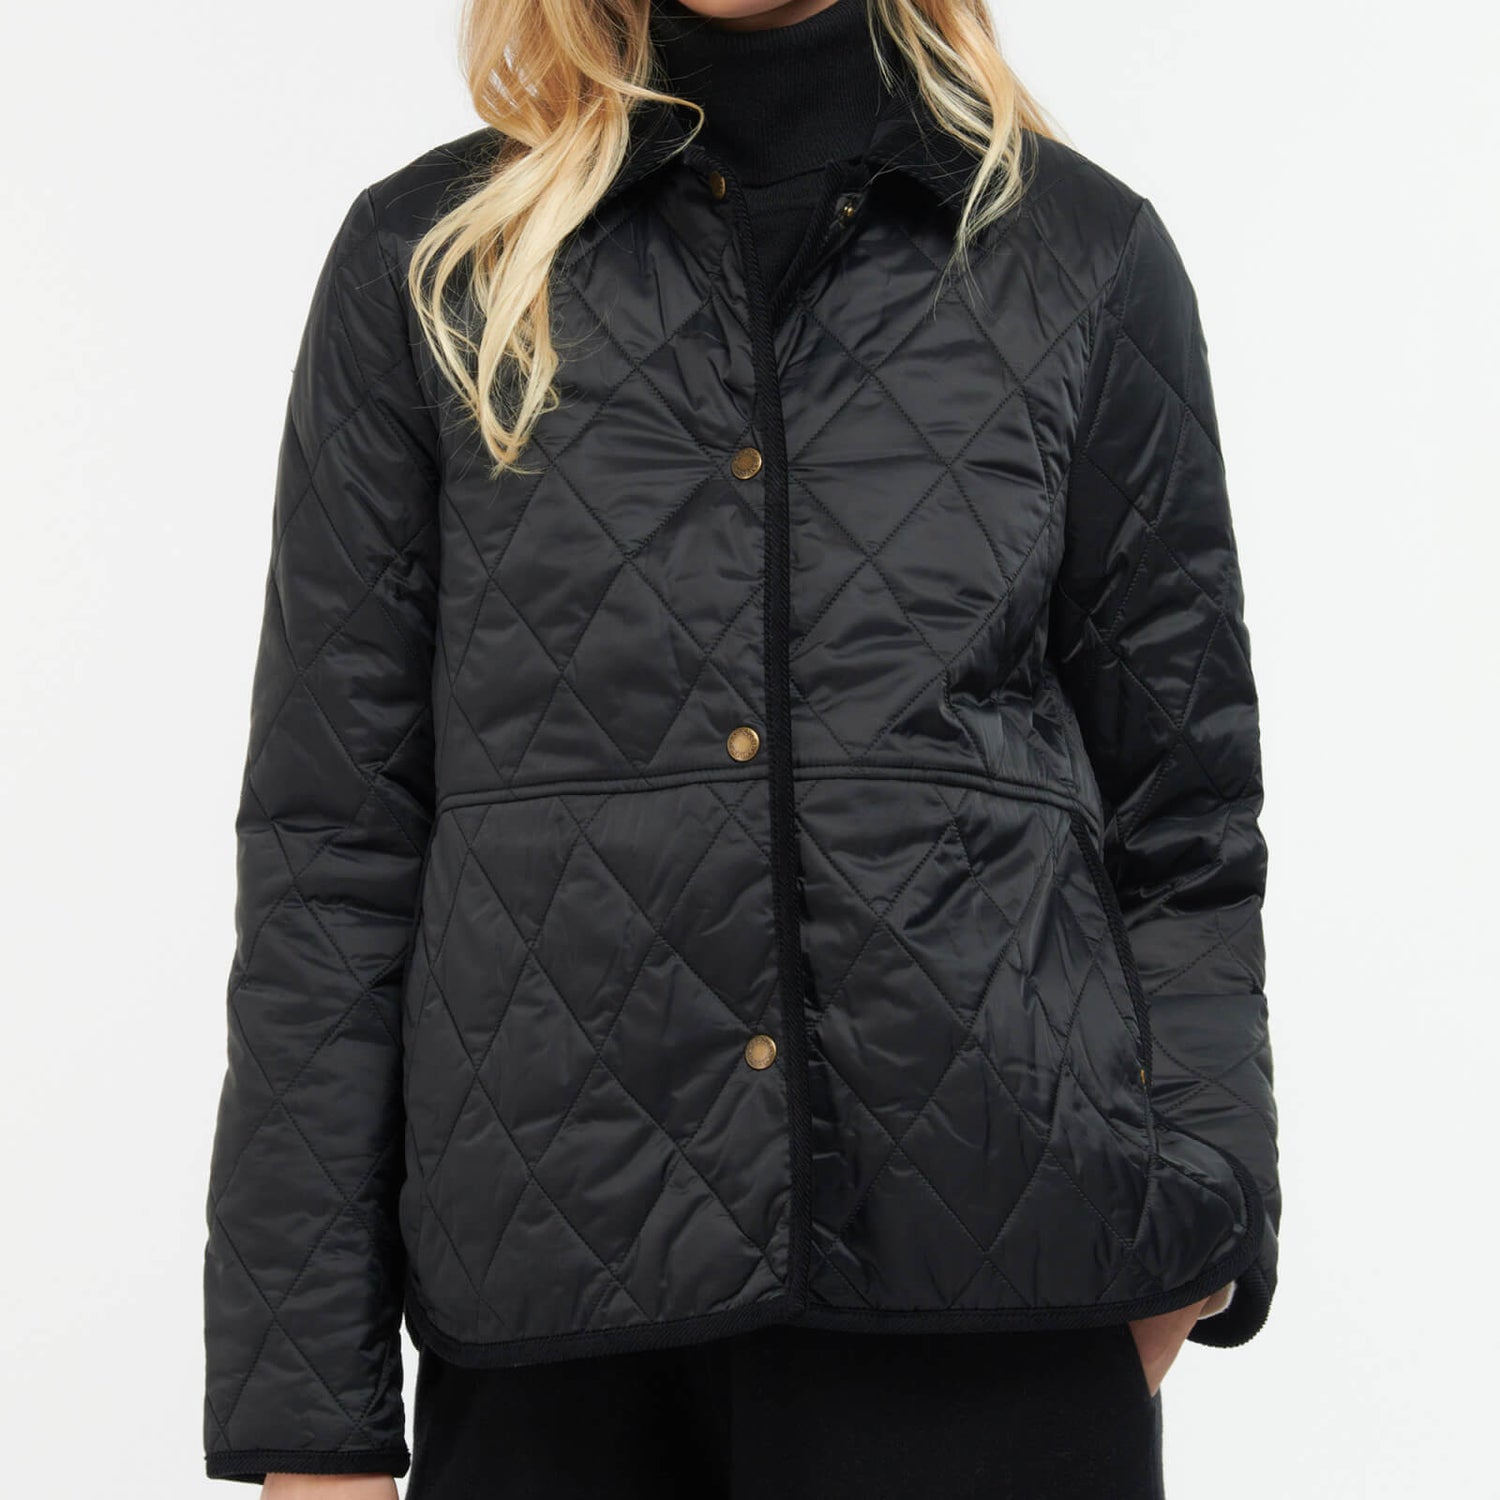 Barbour Clydebank Quilted Shell Jacket - UK 8